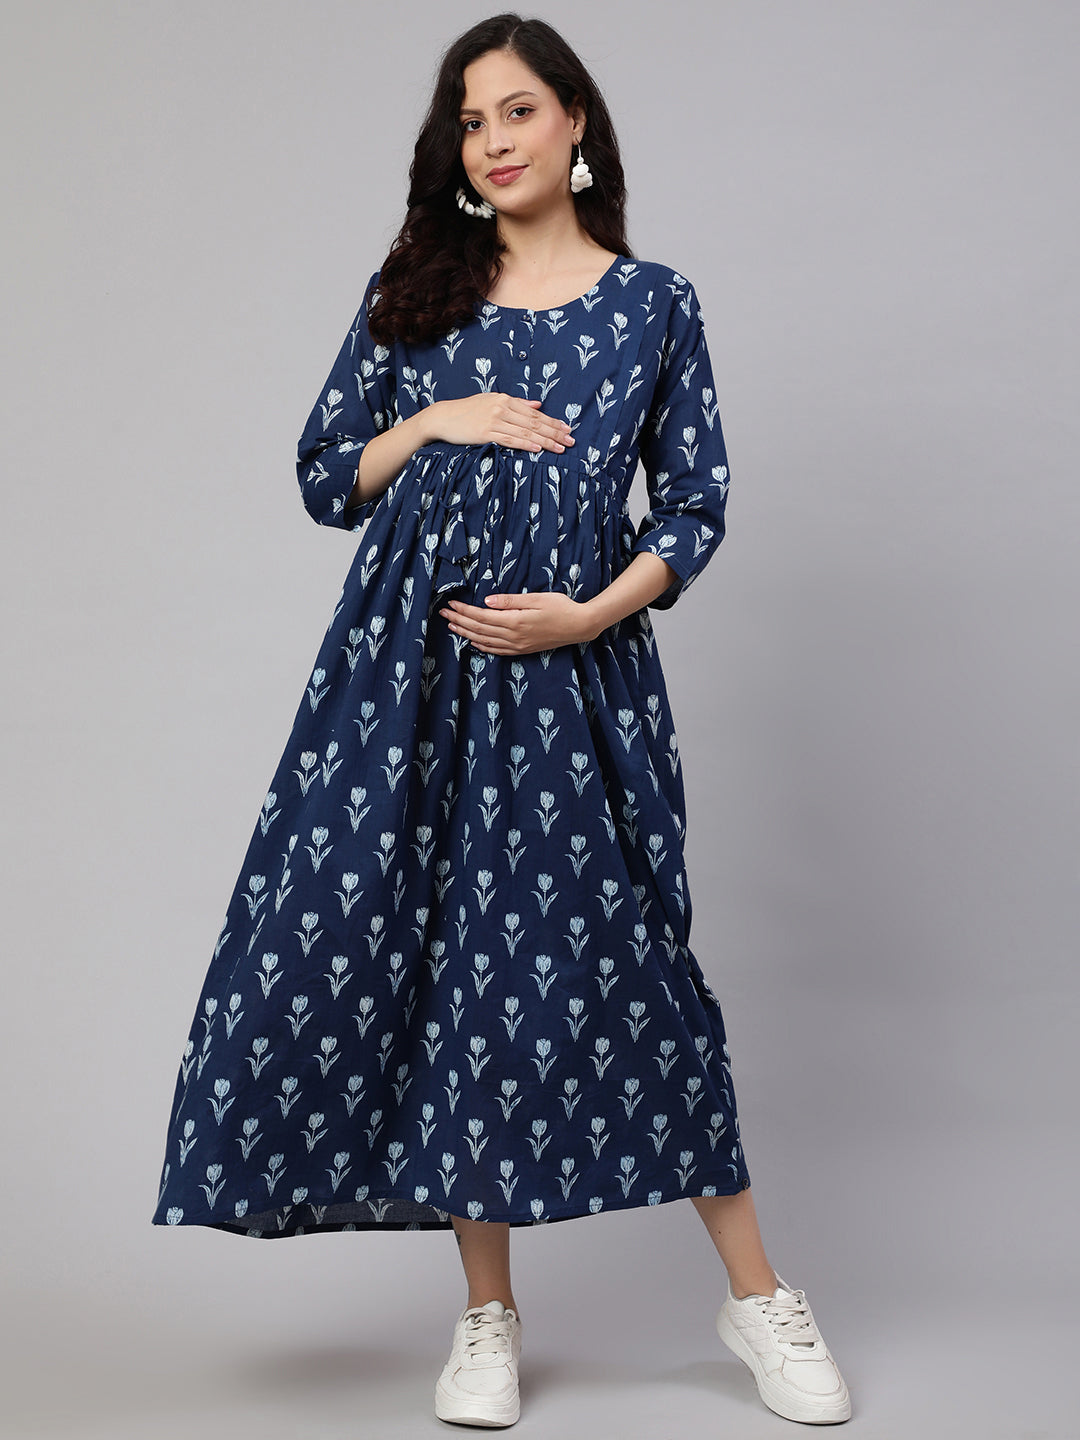 Women's Blue Floral Printed Flared Maternity Dress - Nayo Clothing